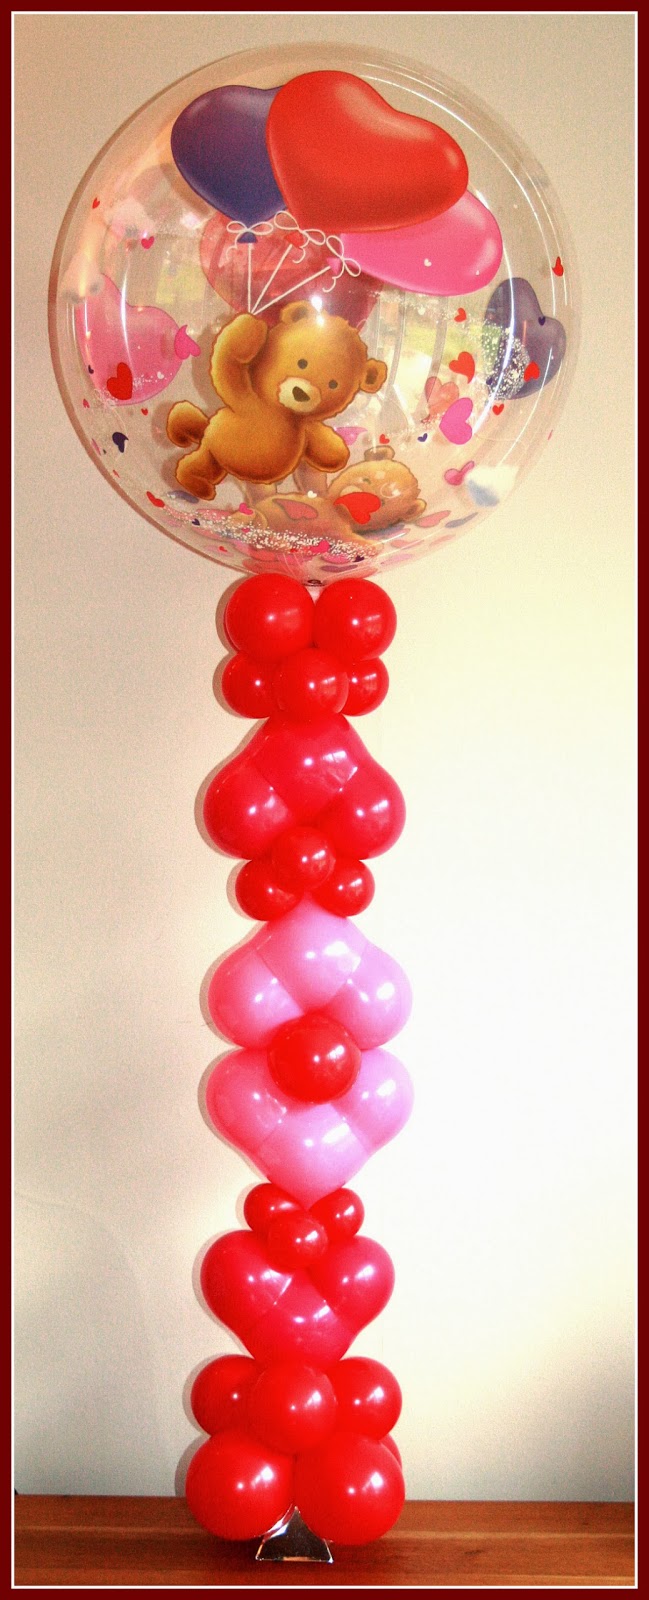 The Very Best Balloon Blog: Inside Out and Upside Down the versatility  of a Qualatex Geo Blossom!